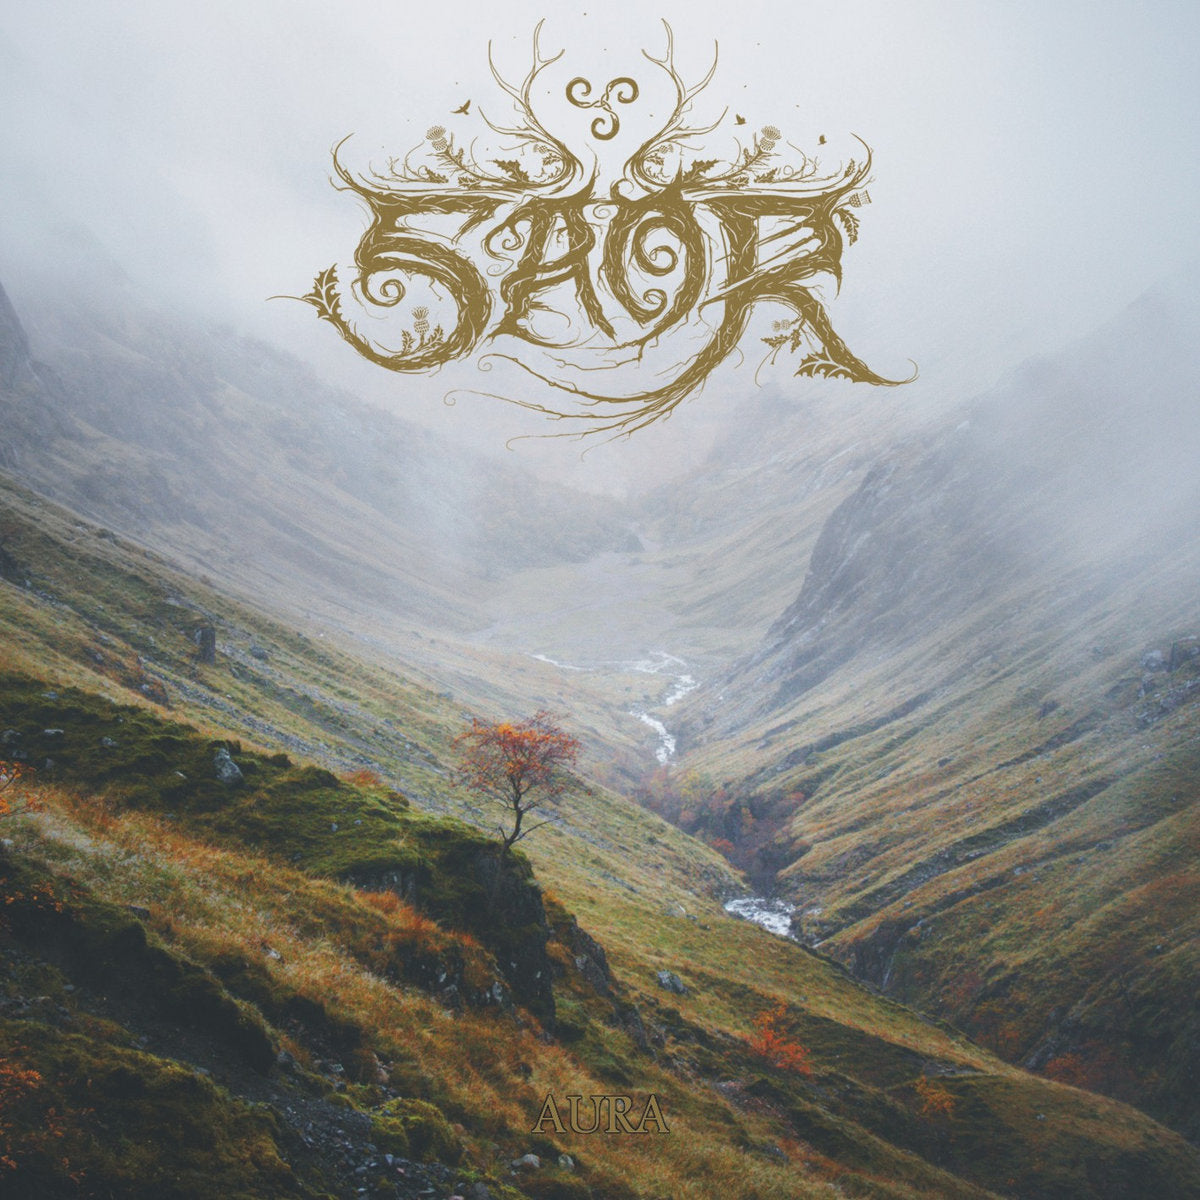 [SOLD OUT] SAOR "Aura" CD